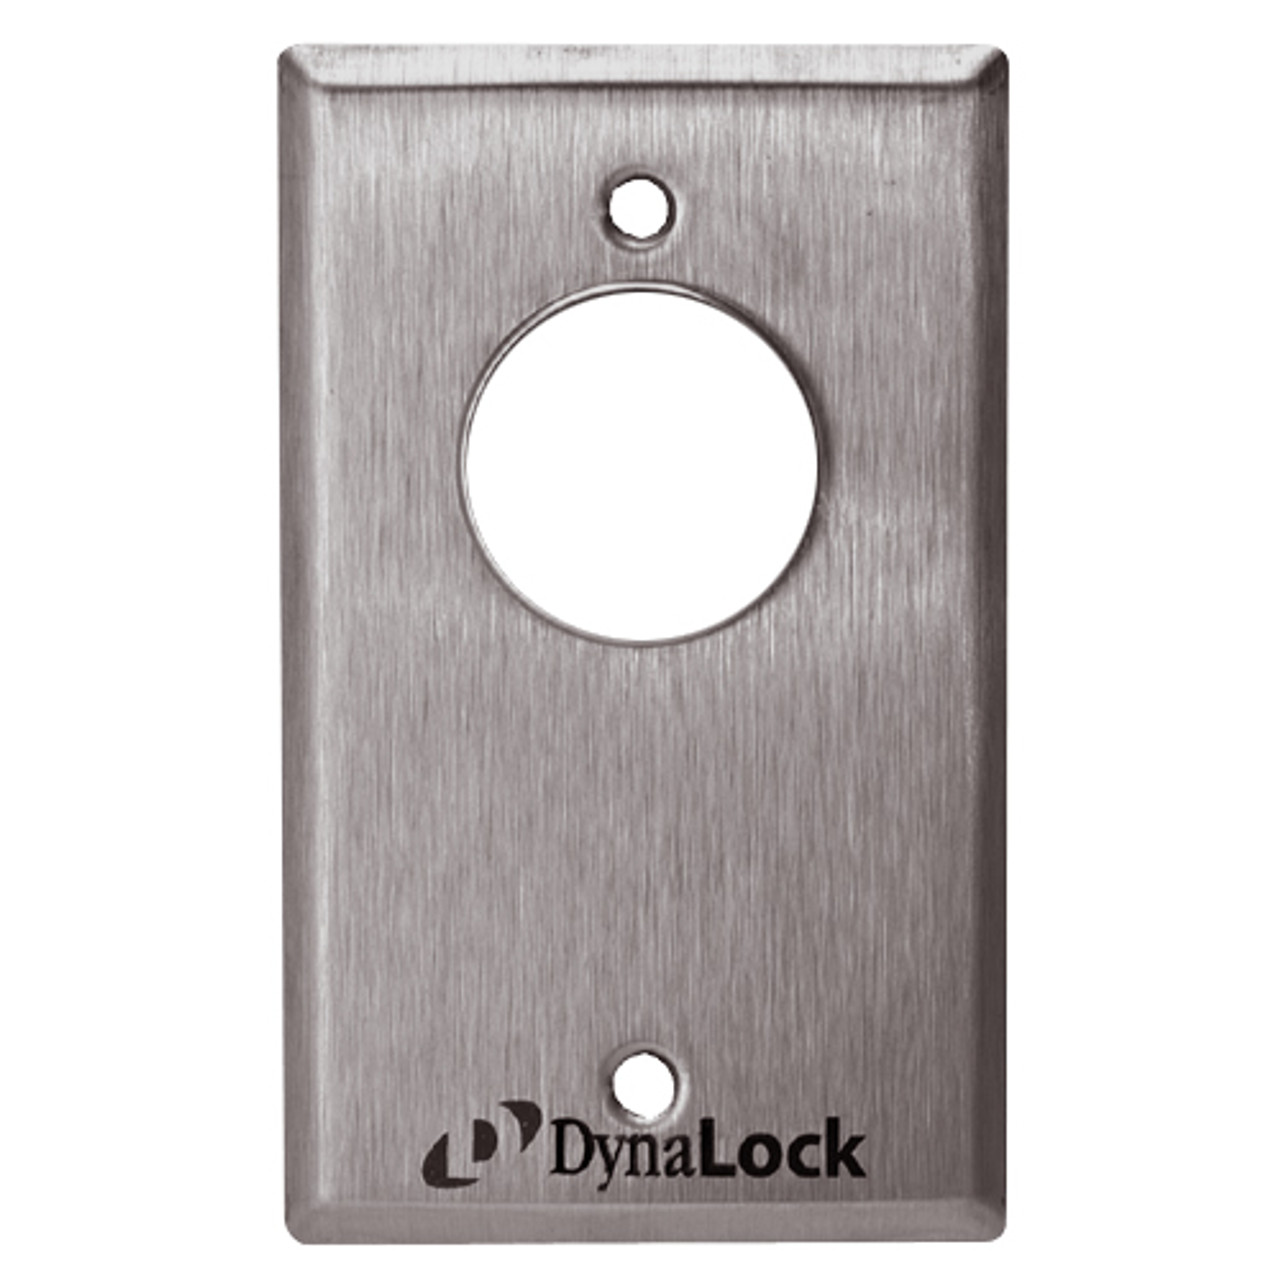 7023-US32D-LED DynaLock 7000 Series Keyswitches Maintained 2 Double Pole Double Throw with Bi-Color LED in Satin Stainless Steel